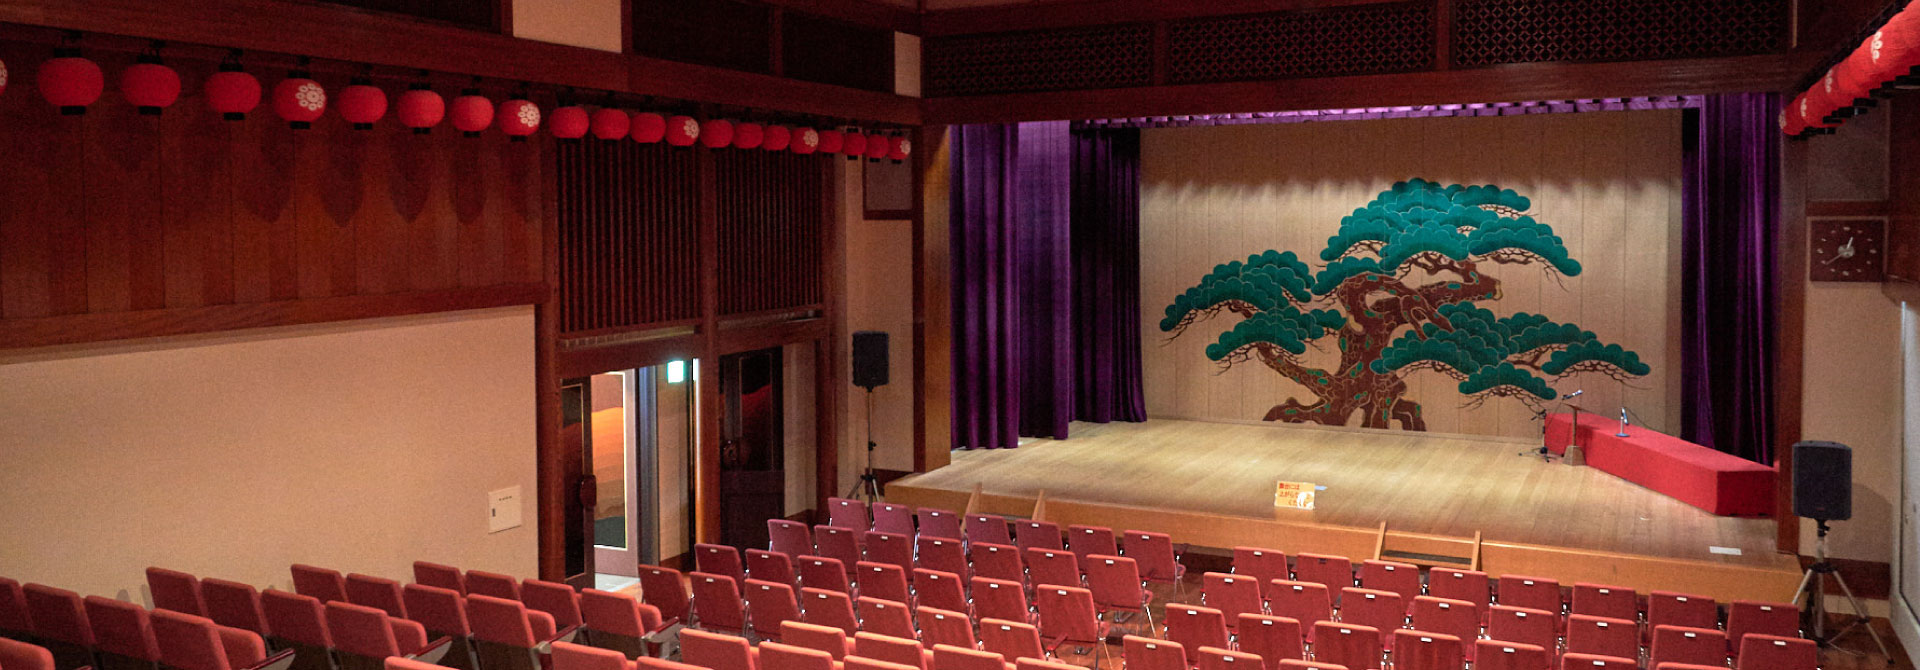 A theatre which is the place to see Geisha dances and sings at the stage on weekends.